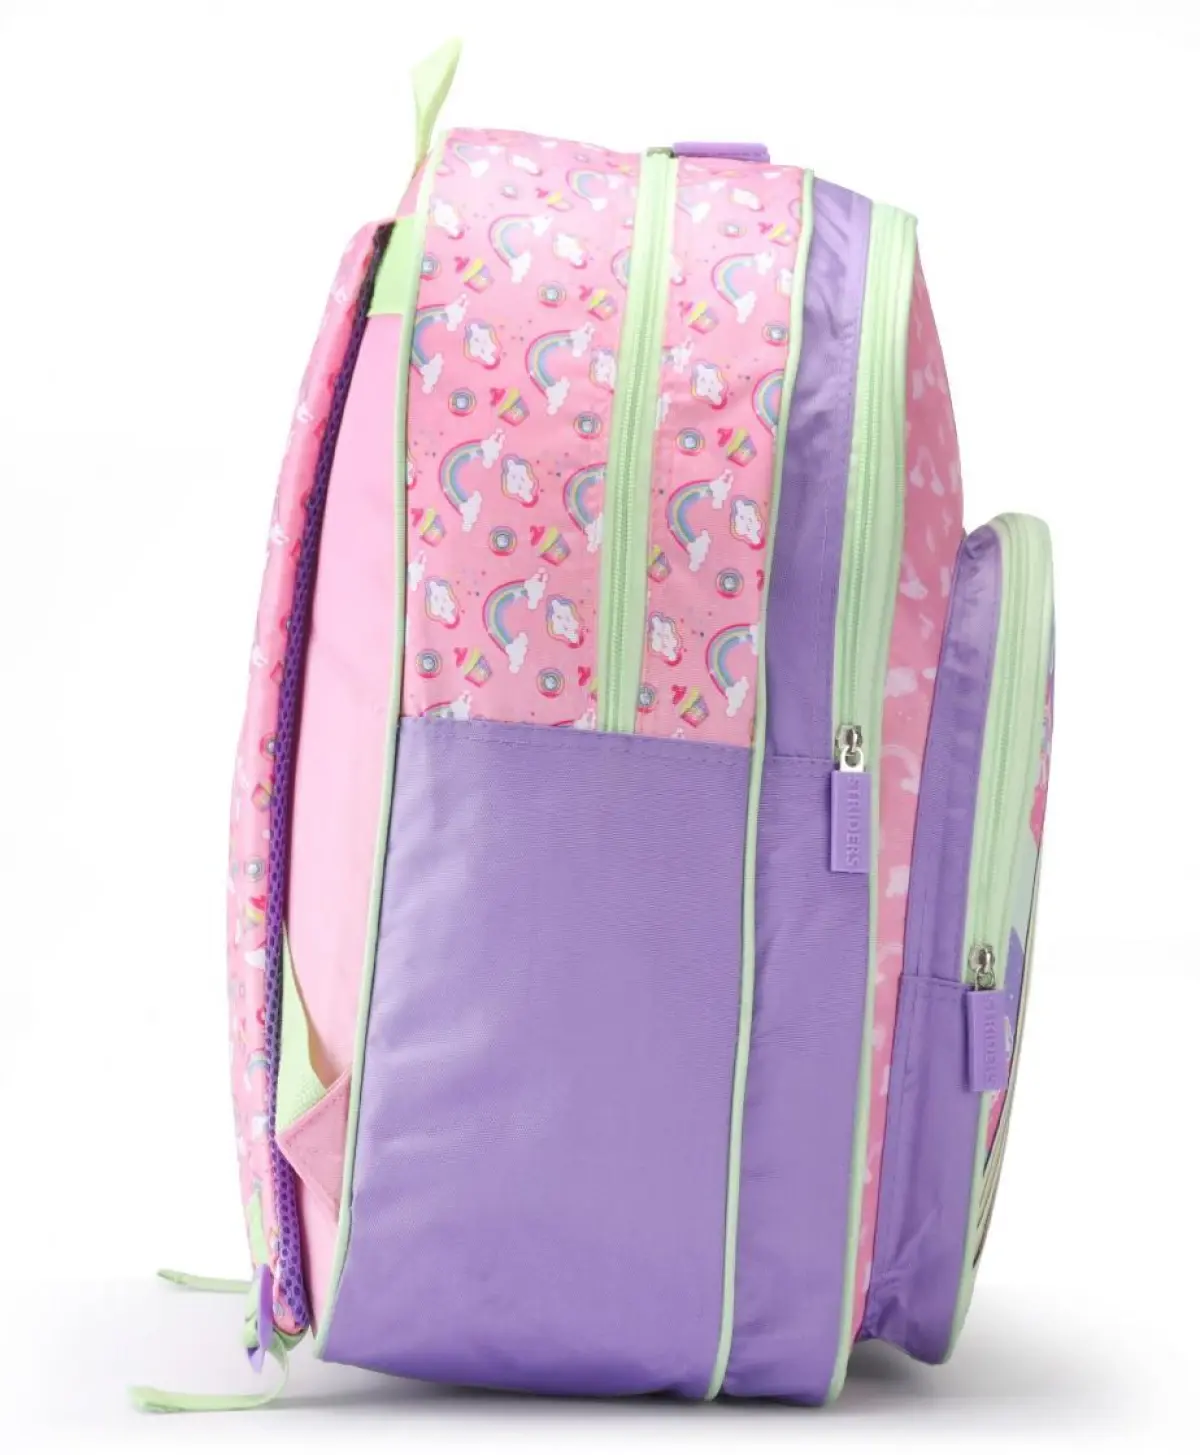 Striders 14 inches Barbie School Bag Dreams in Style for Little Fashionistas Multicolor For Kids Ages 3Y+